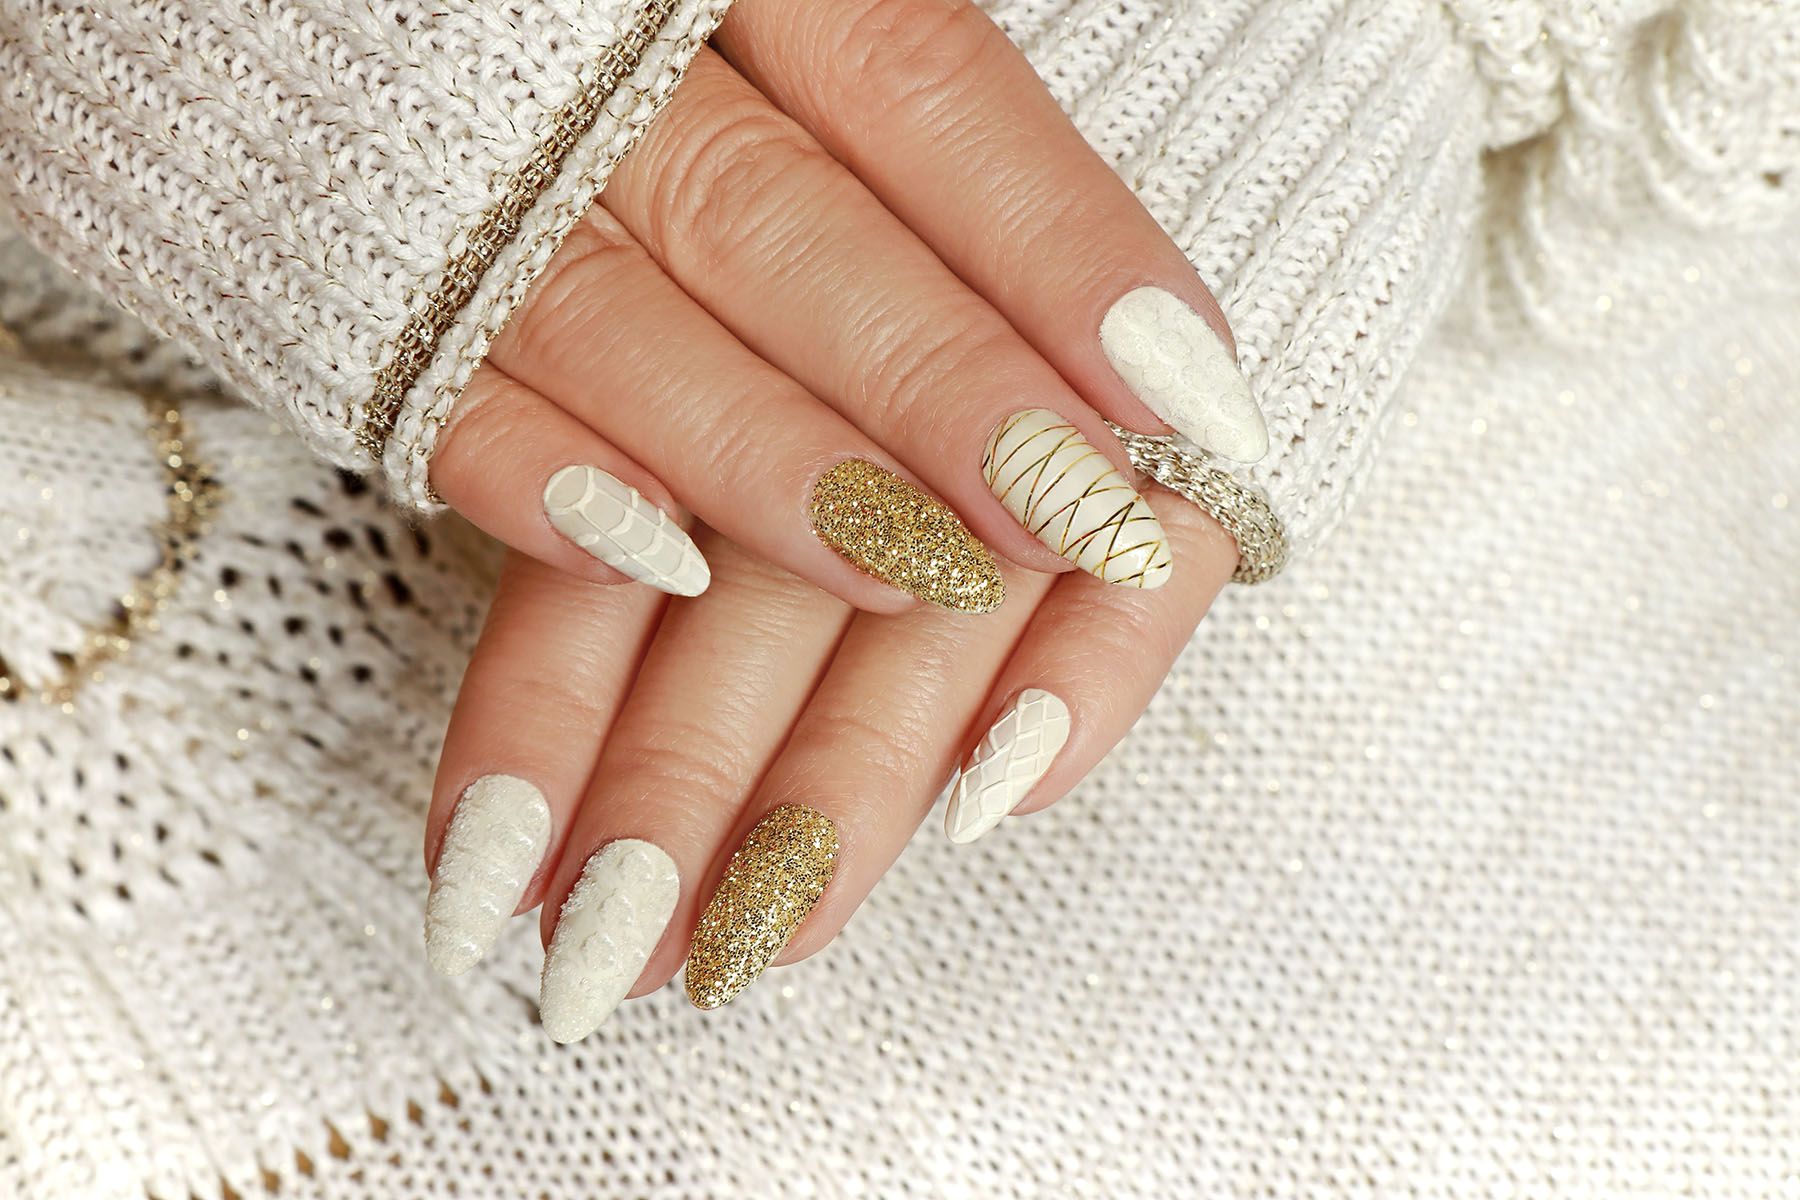 50+ Cute Fall Nail Designs You Need To Try! - Prada & Pearls